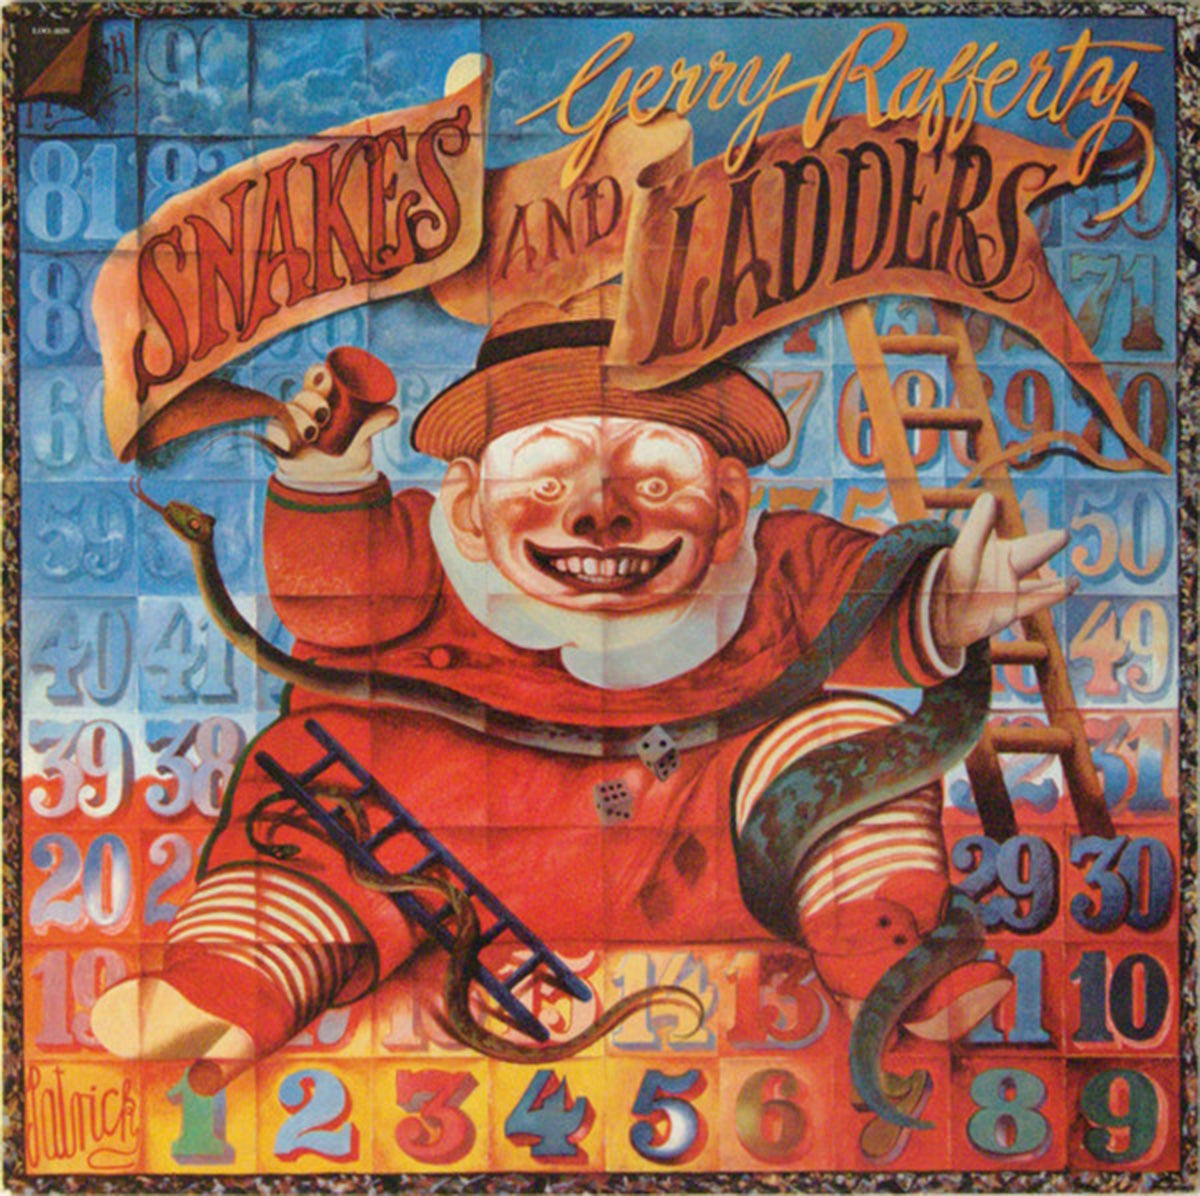 Gerry Rafferty – Snakes And Ladders - 1980